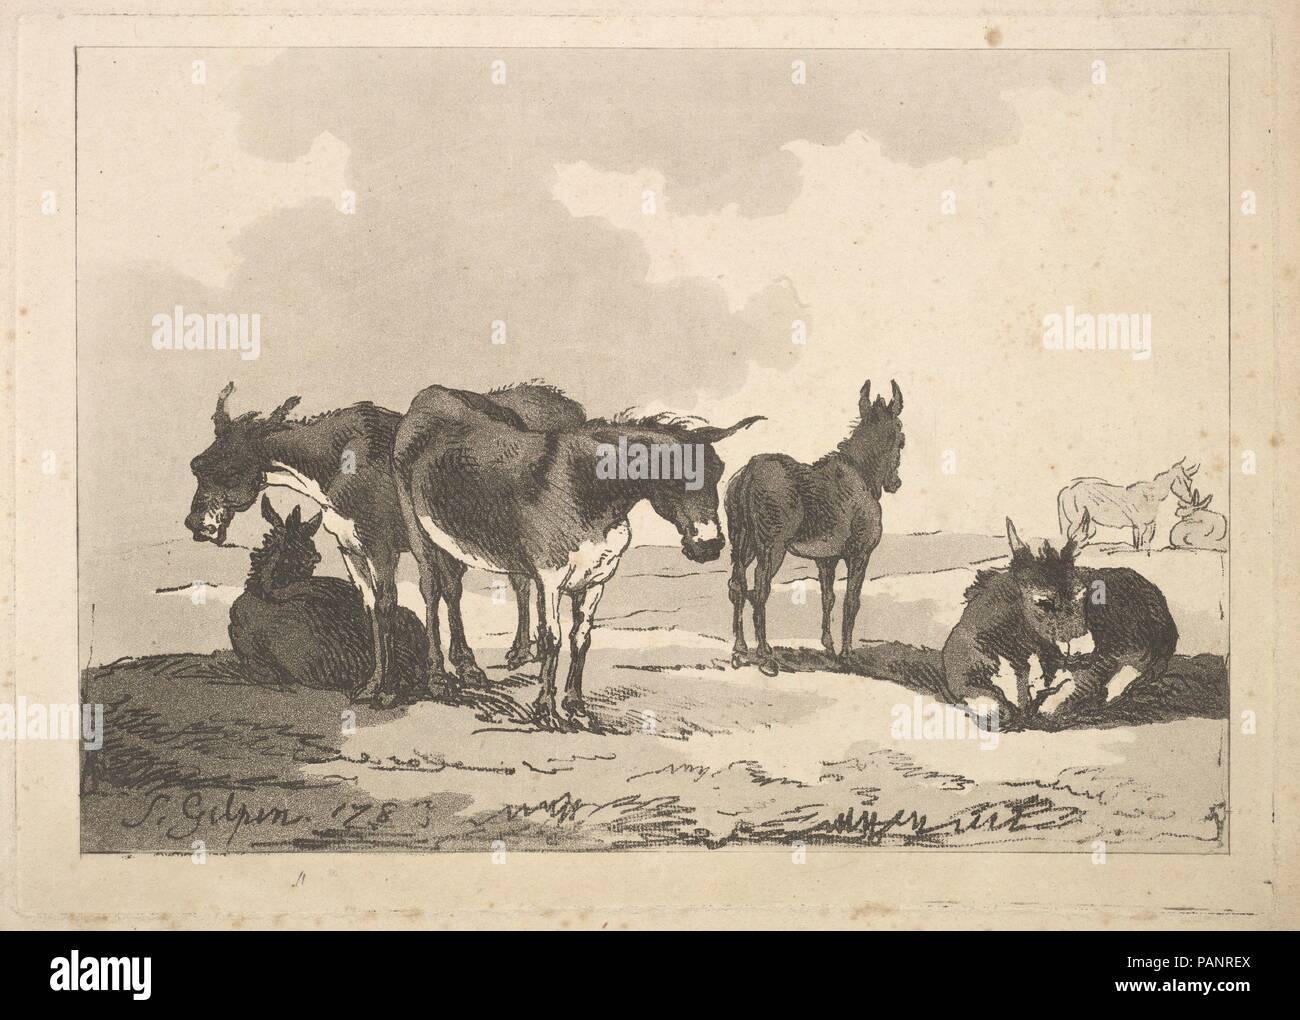 A Group of Five Donkeys, Three Standing, Two Lying. Artist: After Sawrey Gilpin (British, near Carlisle 1733-1807 Scaleby, Cumbria). Dimensions: Plate: 7 13/16 x 10 7/8 in. (19.8 x 27.7 cm)  Sheet: 18 1/2 x 12 3/8 in. (47 x 31.5 cm). Etcher: Thomas Rowlandson (British, London 1757-1827 London). Published in: London. Series/Portfolio: Imitations of Modern Drawings. Date: 1783. Museum: Metropolitan Museum of Art, New York, USA. Stock Photo